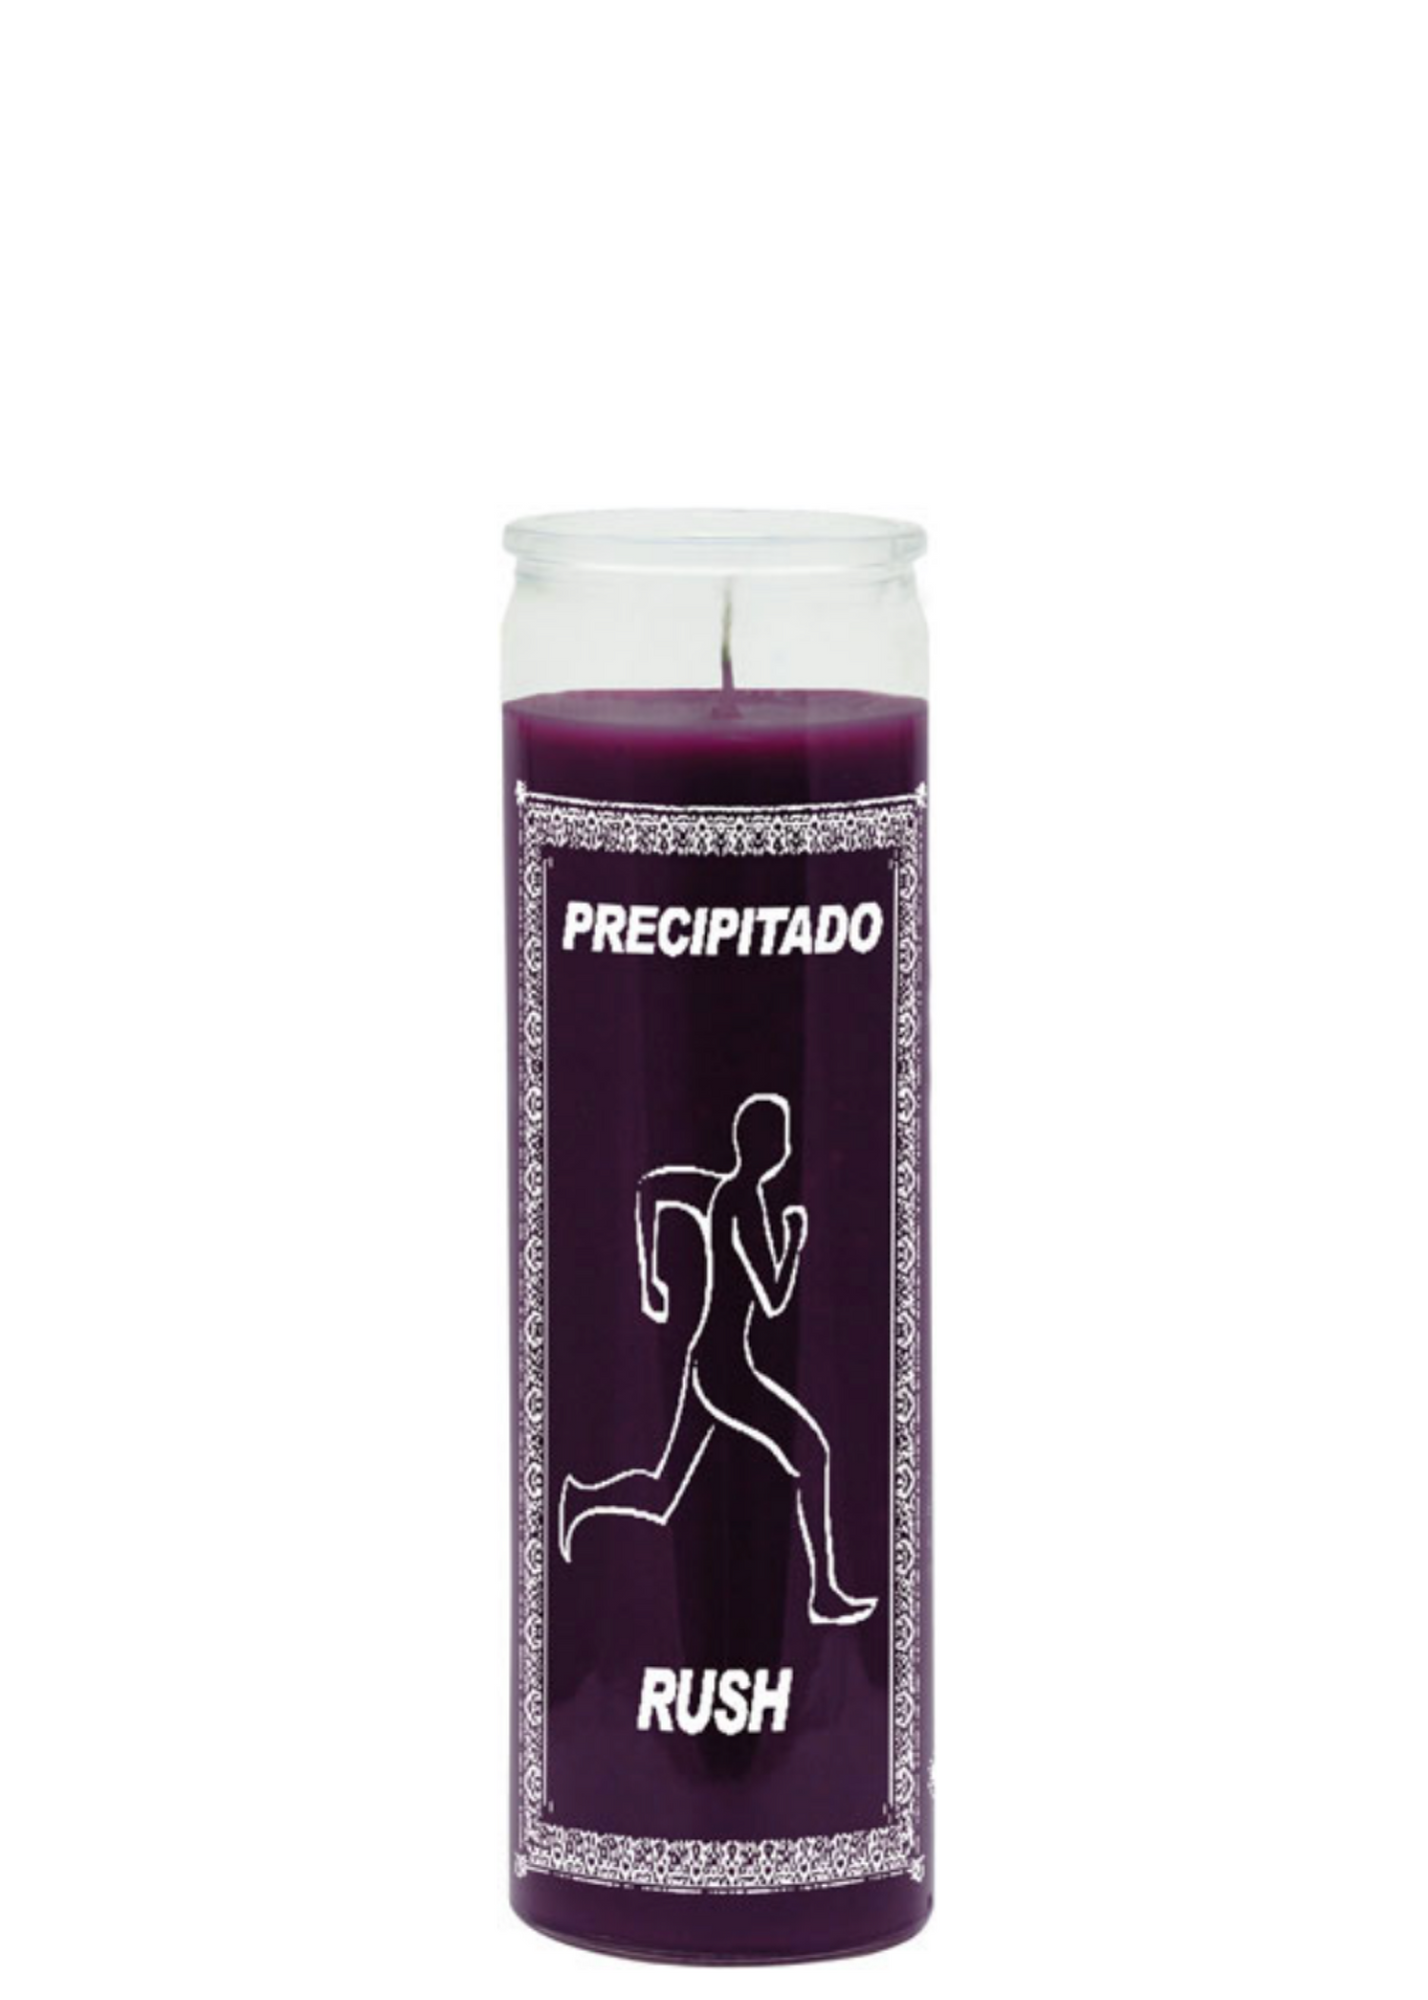 Rush (purple) 1 color 7 day candle